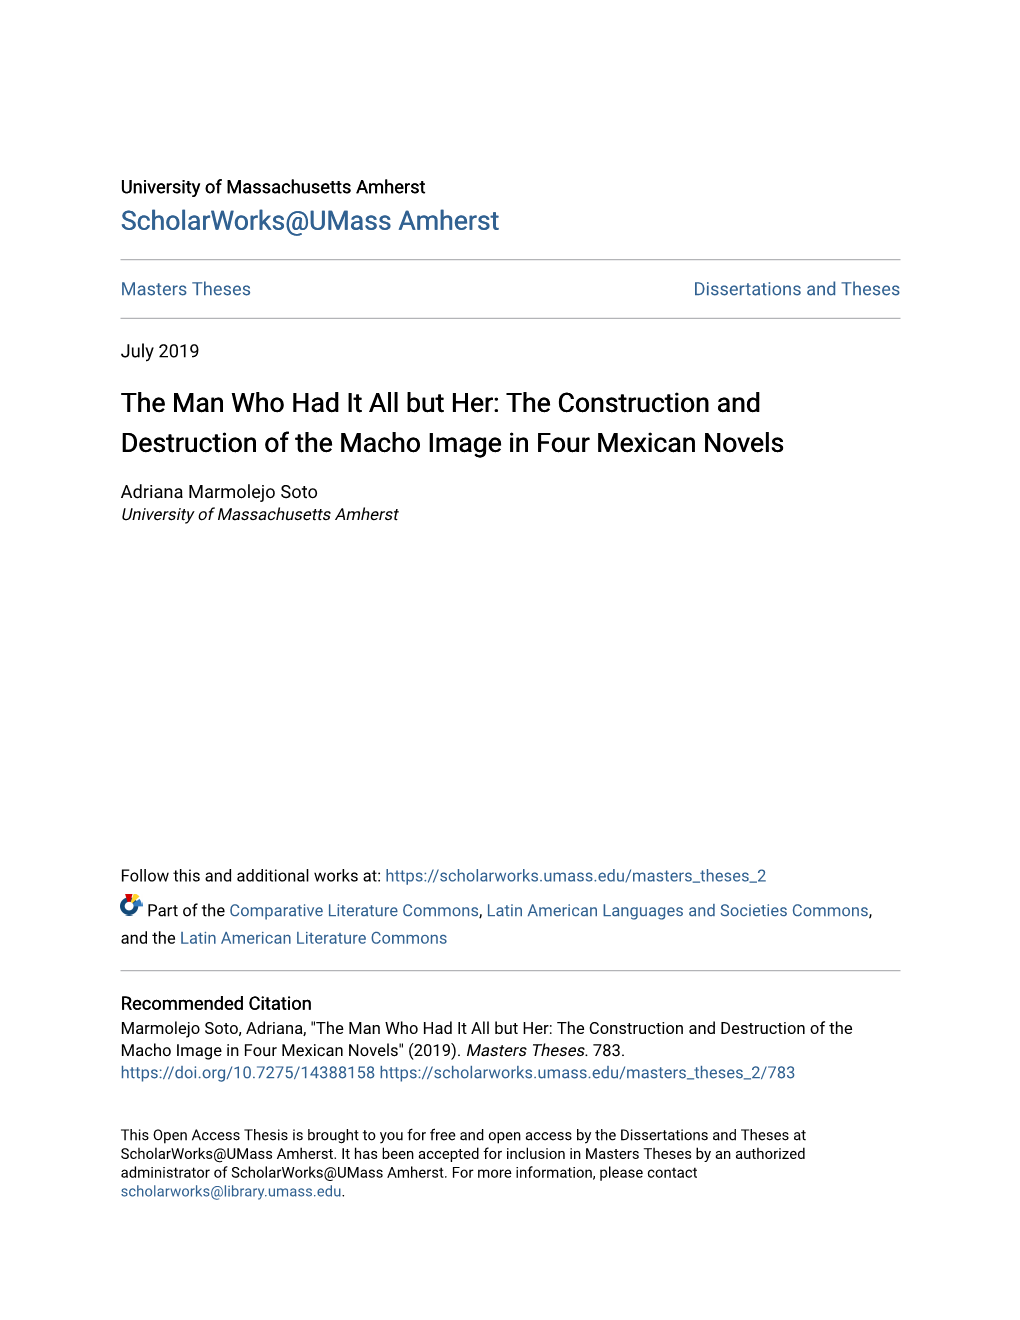 The Man Who Had It All but Her: the Construction and Destruction of the Macho Image in Four Mexican Novels